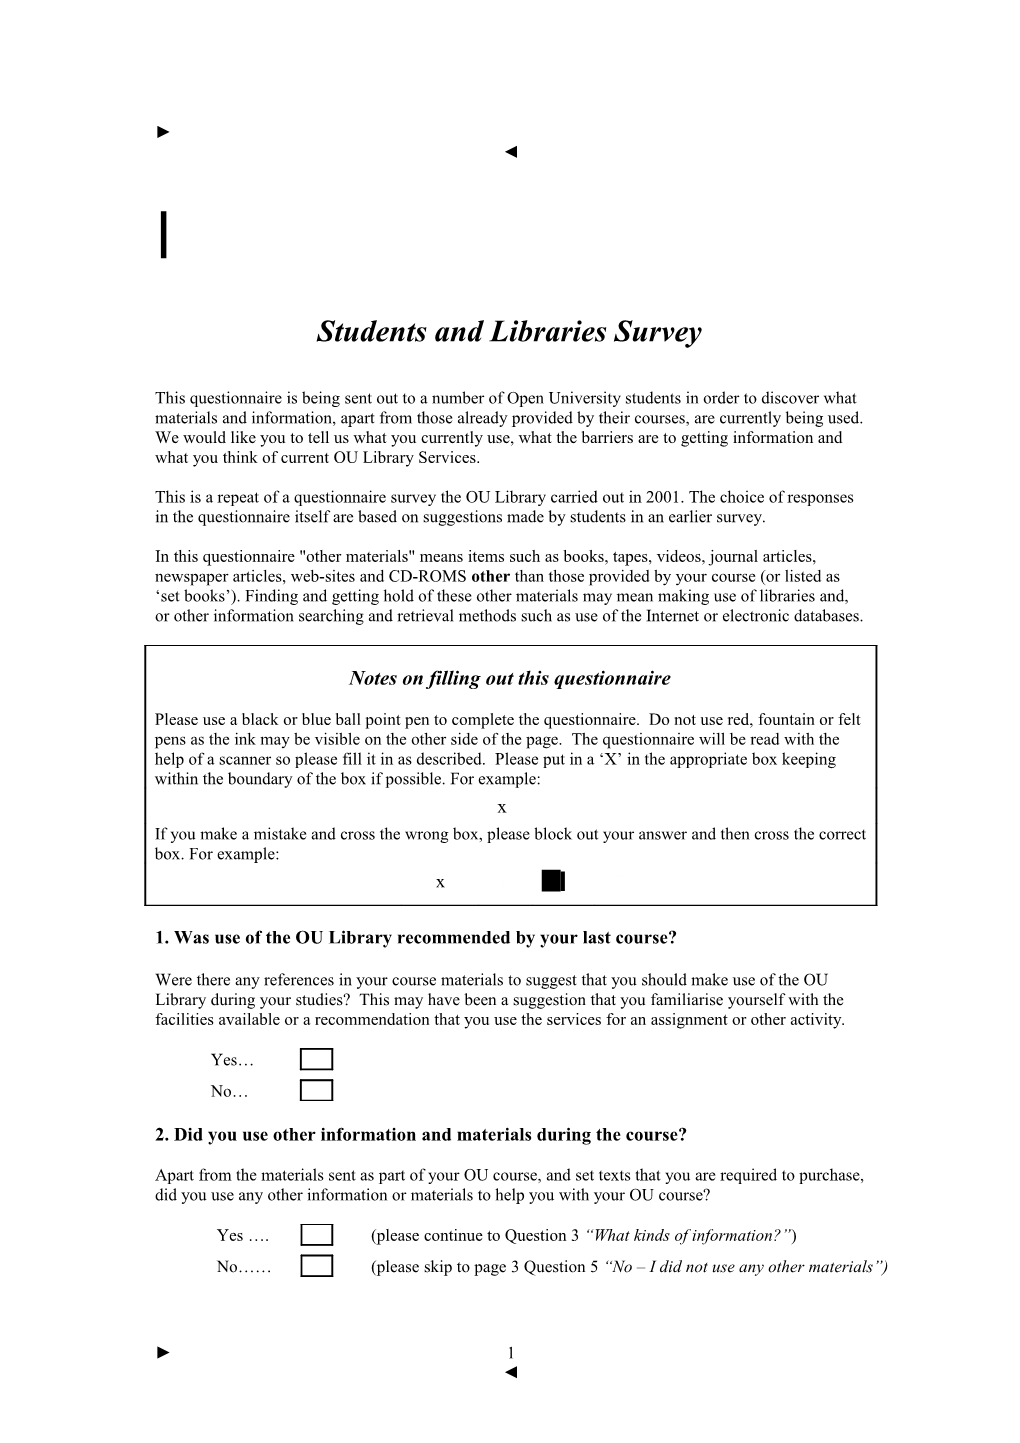 Students and Libraries Survey